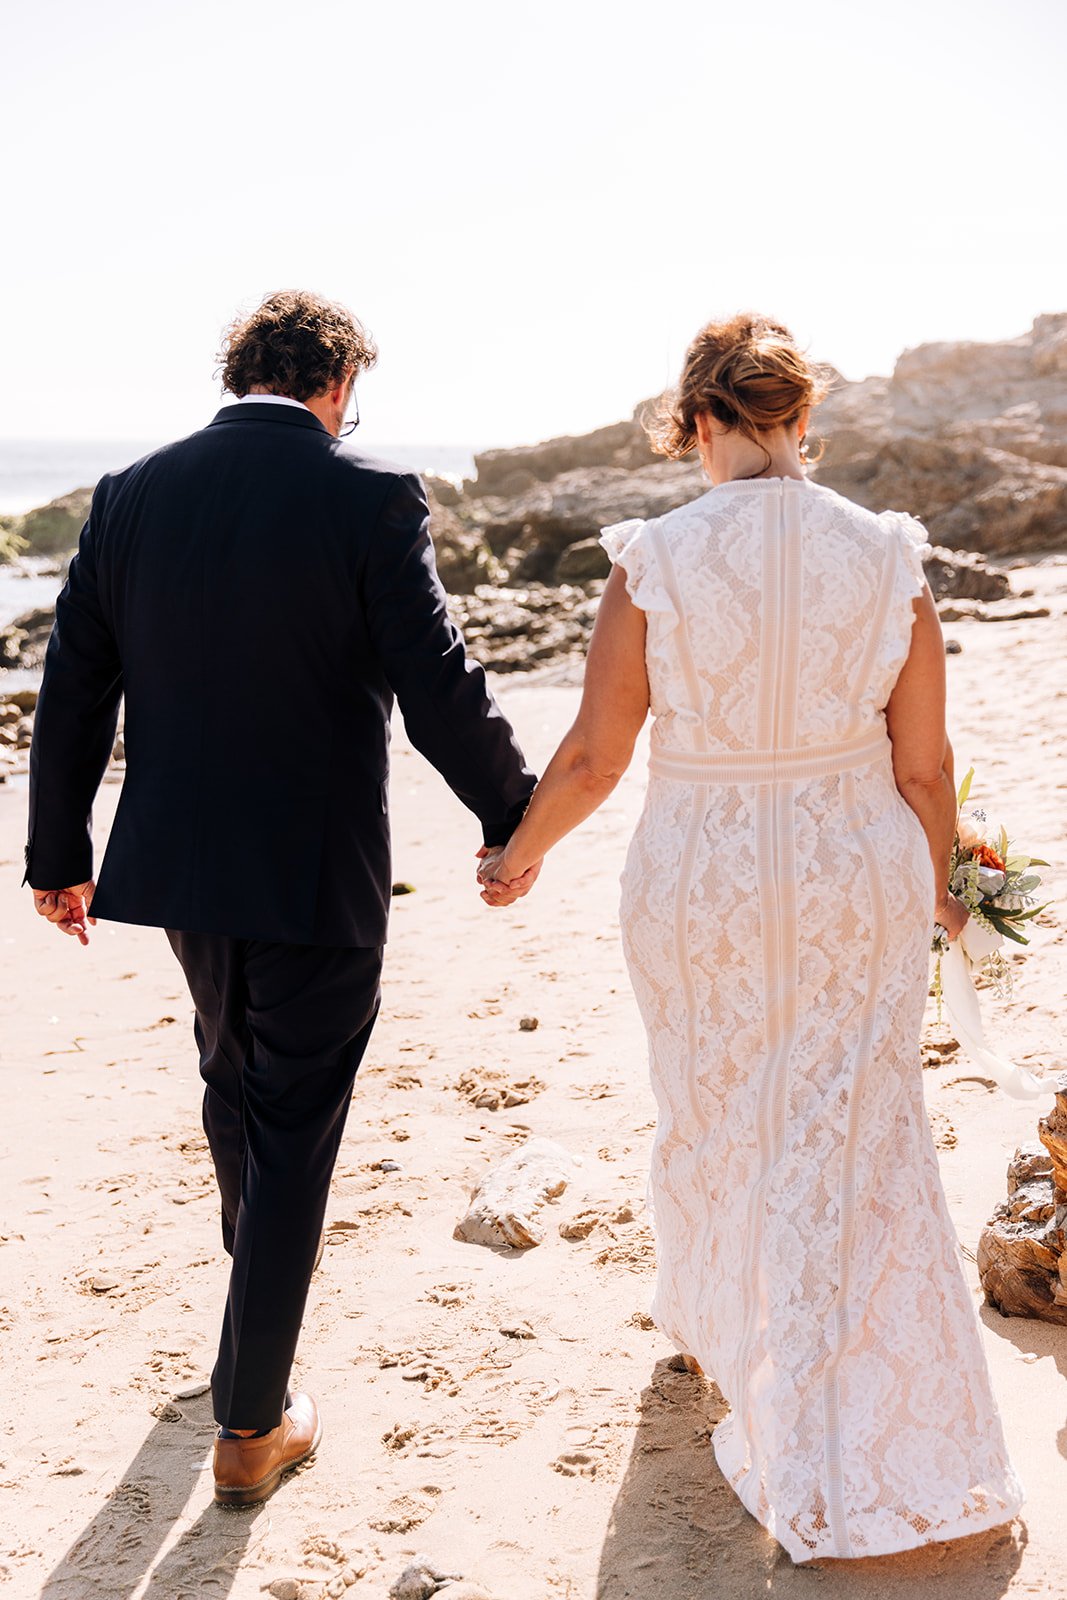 eloping at crystal cove in Laguna beach, eloping with your children, Orange County elopement photos, beach elopement photos, Laguna elopement photographer